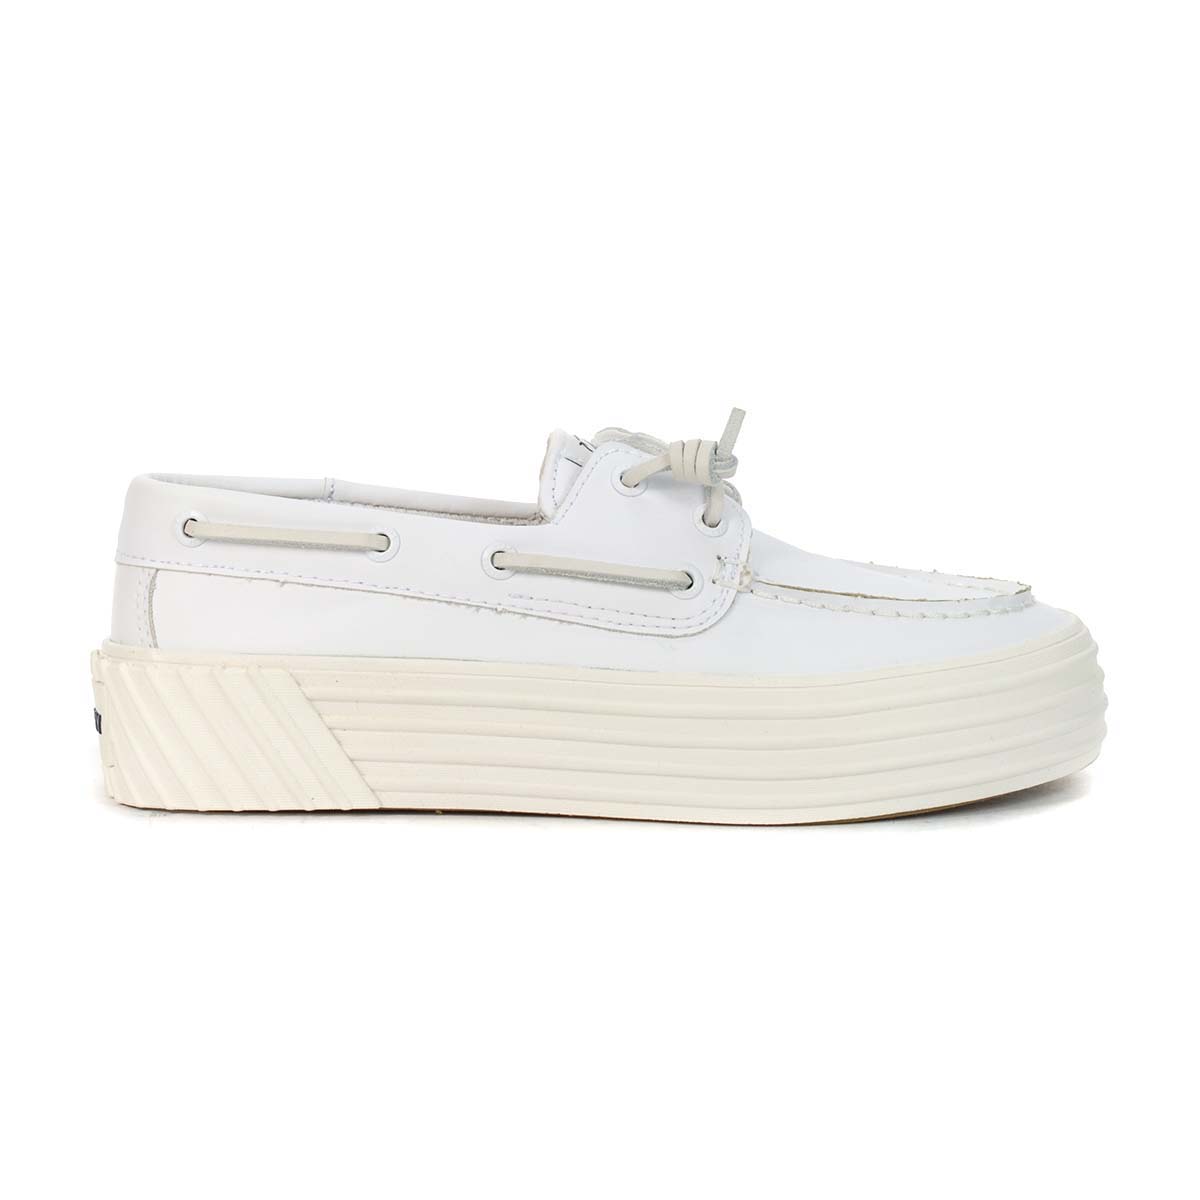 Sperry Women's Bahama 2.0 White Leather Platform Sneakers STS88865